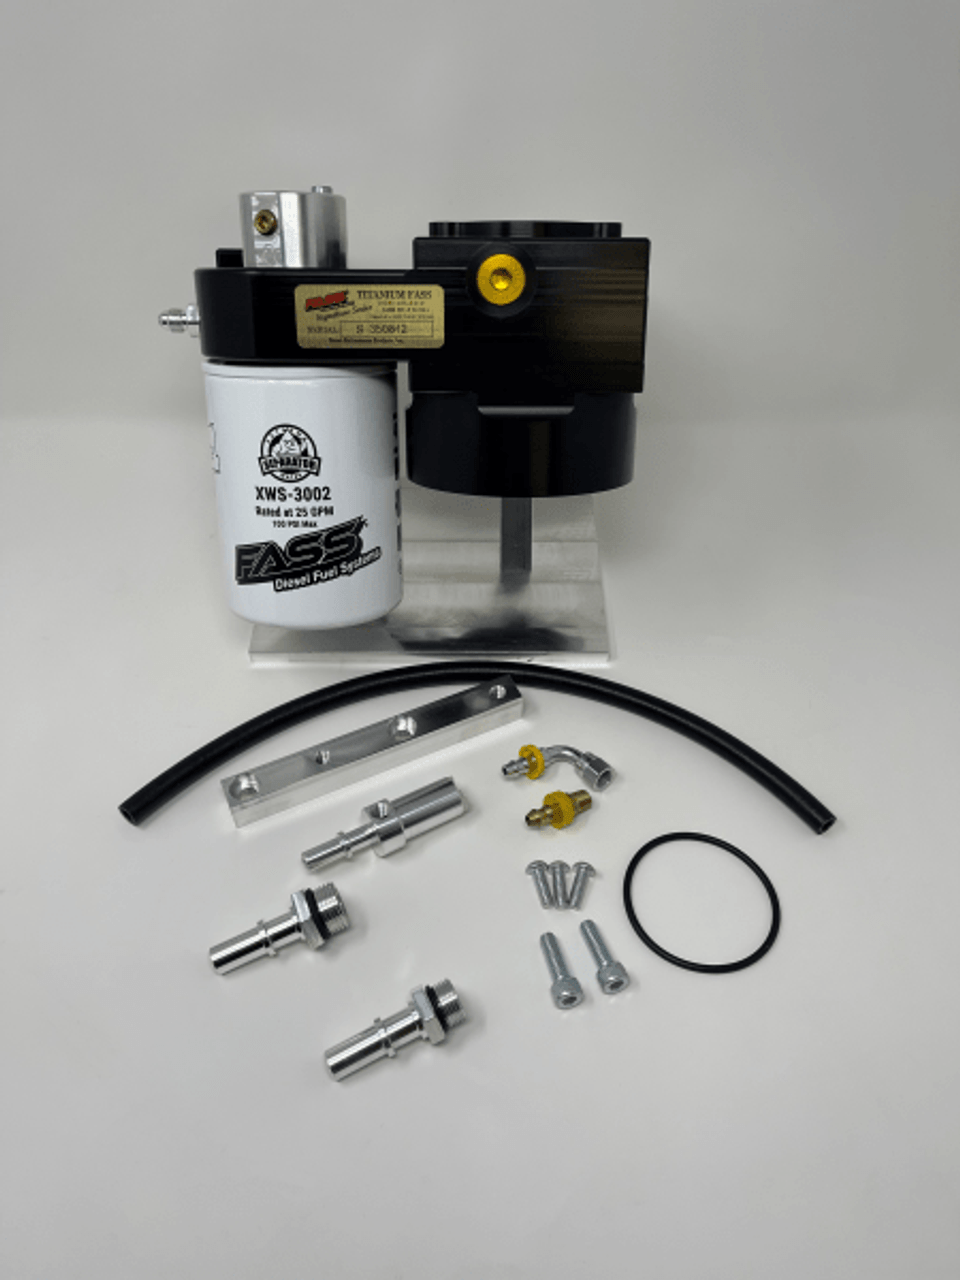  FASS Drop-In Series Diesel Fuel System for 2017-2024 GM (DIFSL5P1001 ) Full View